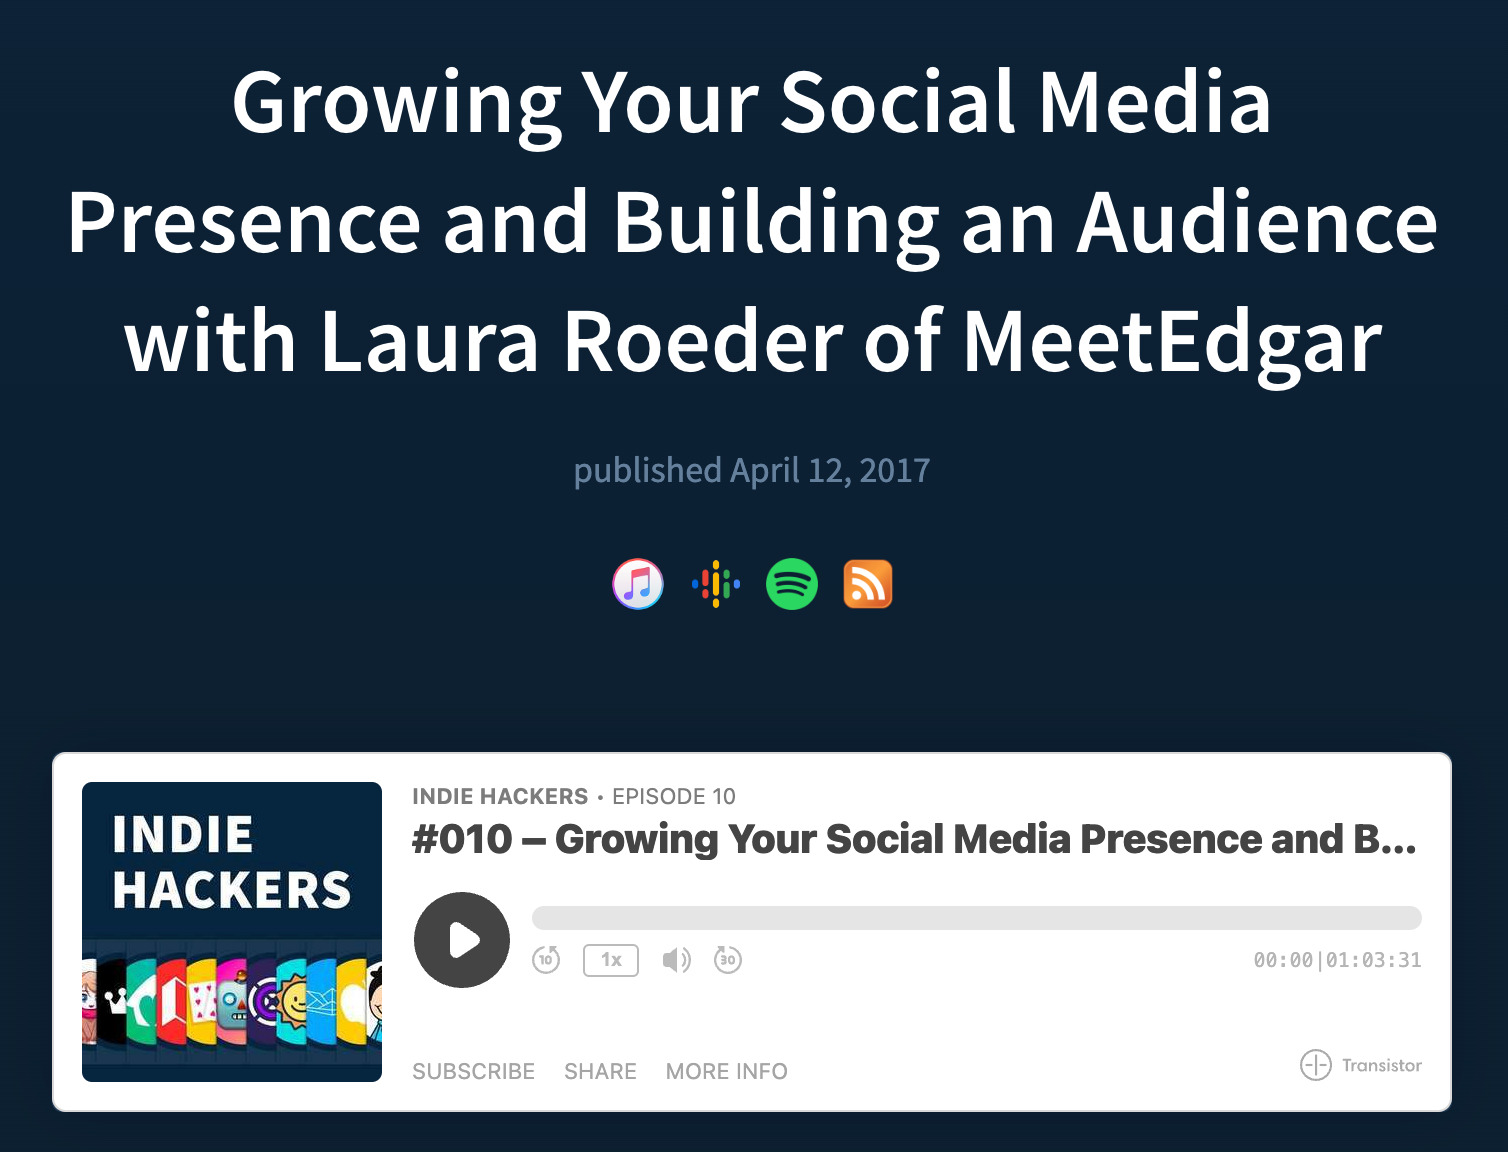 A podcast interview where Laura Roeder, the founder of MeetEdgar, was the guest